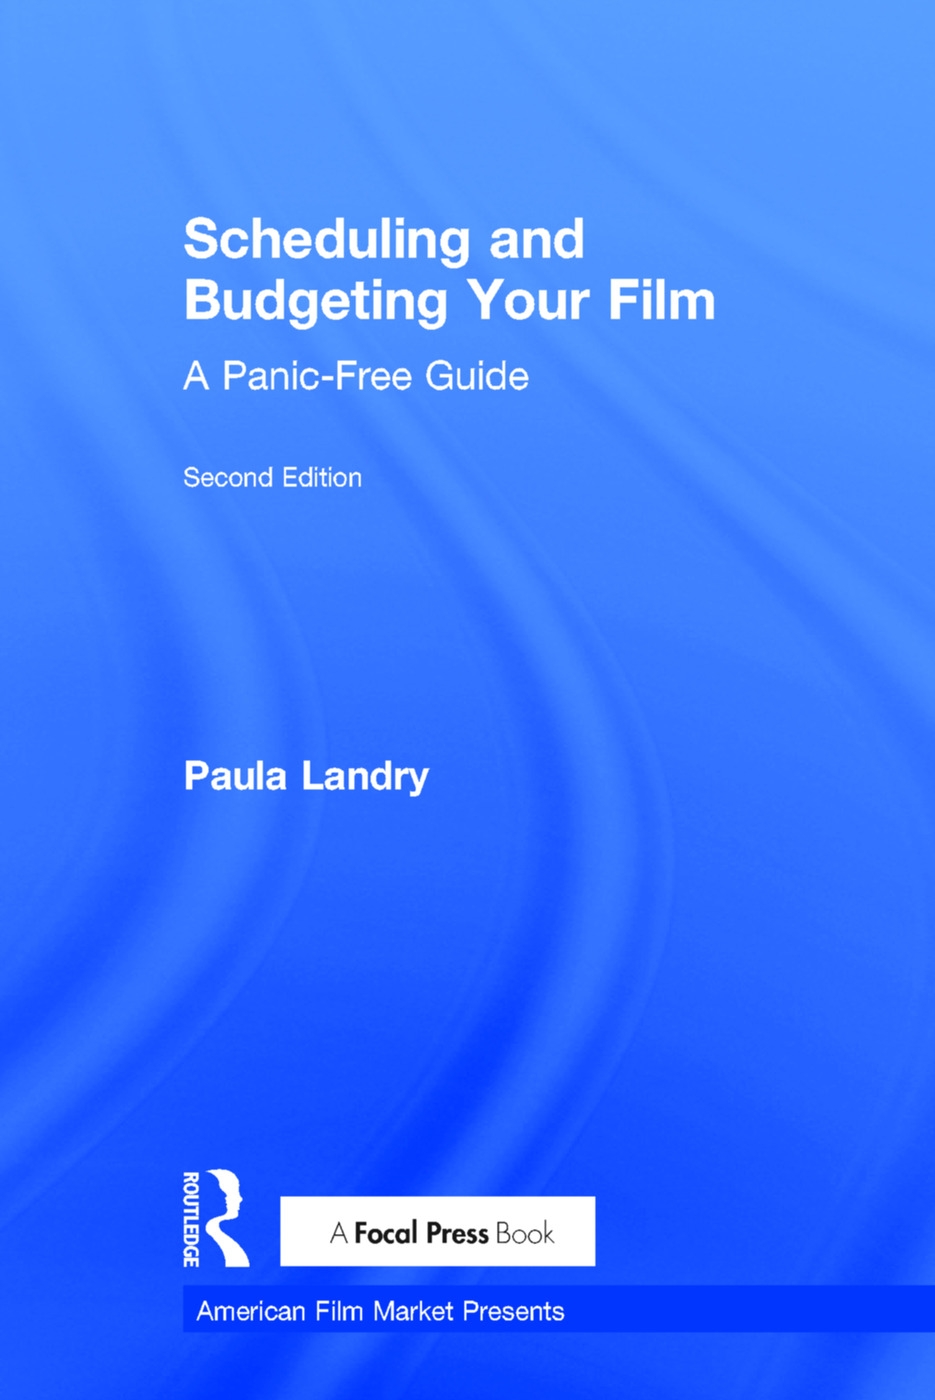 Scheduling and Budgeting Your Film: A Panic-free Guide